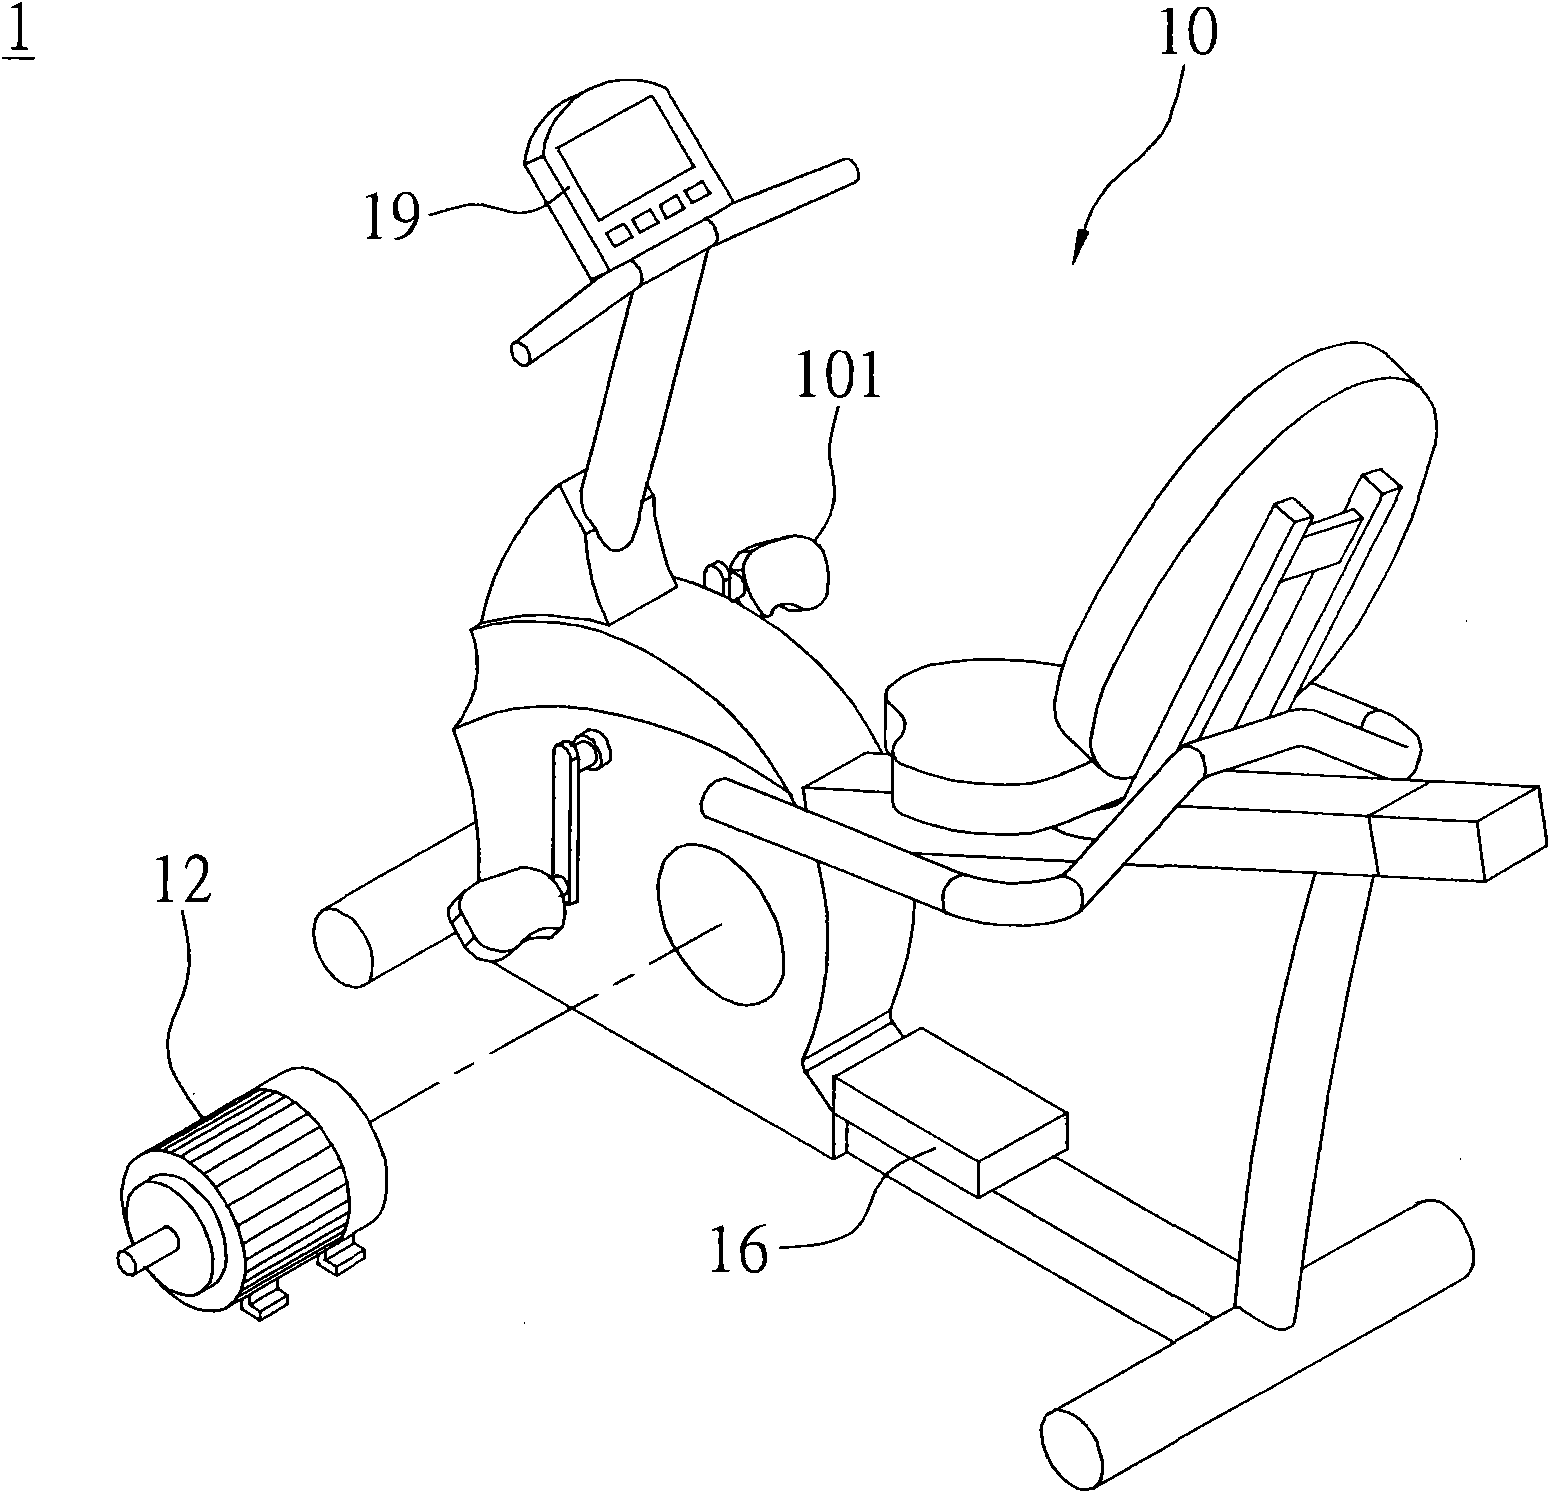 Electric body building device with electricity generating function